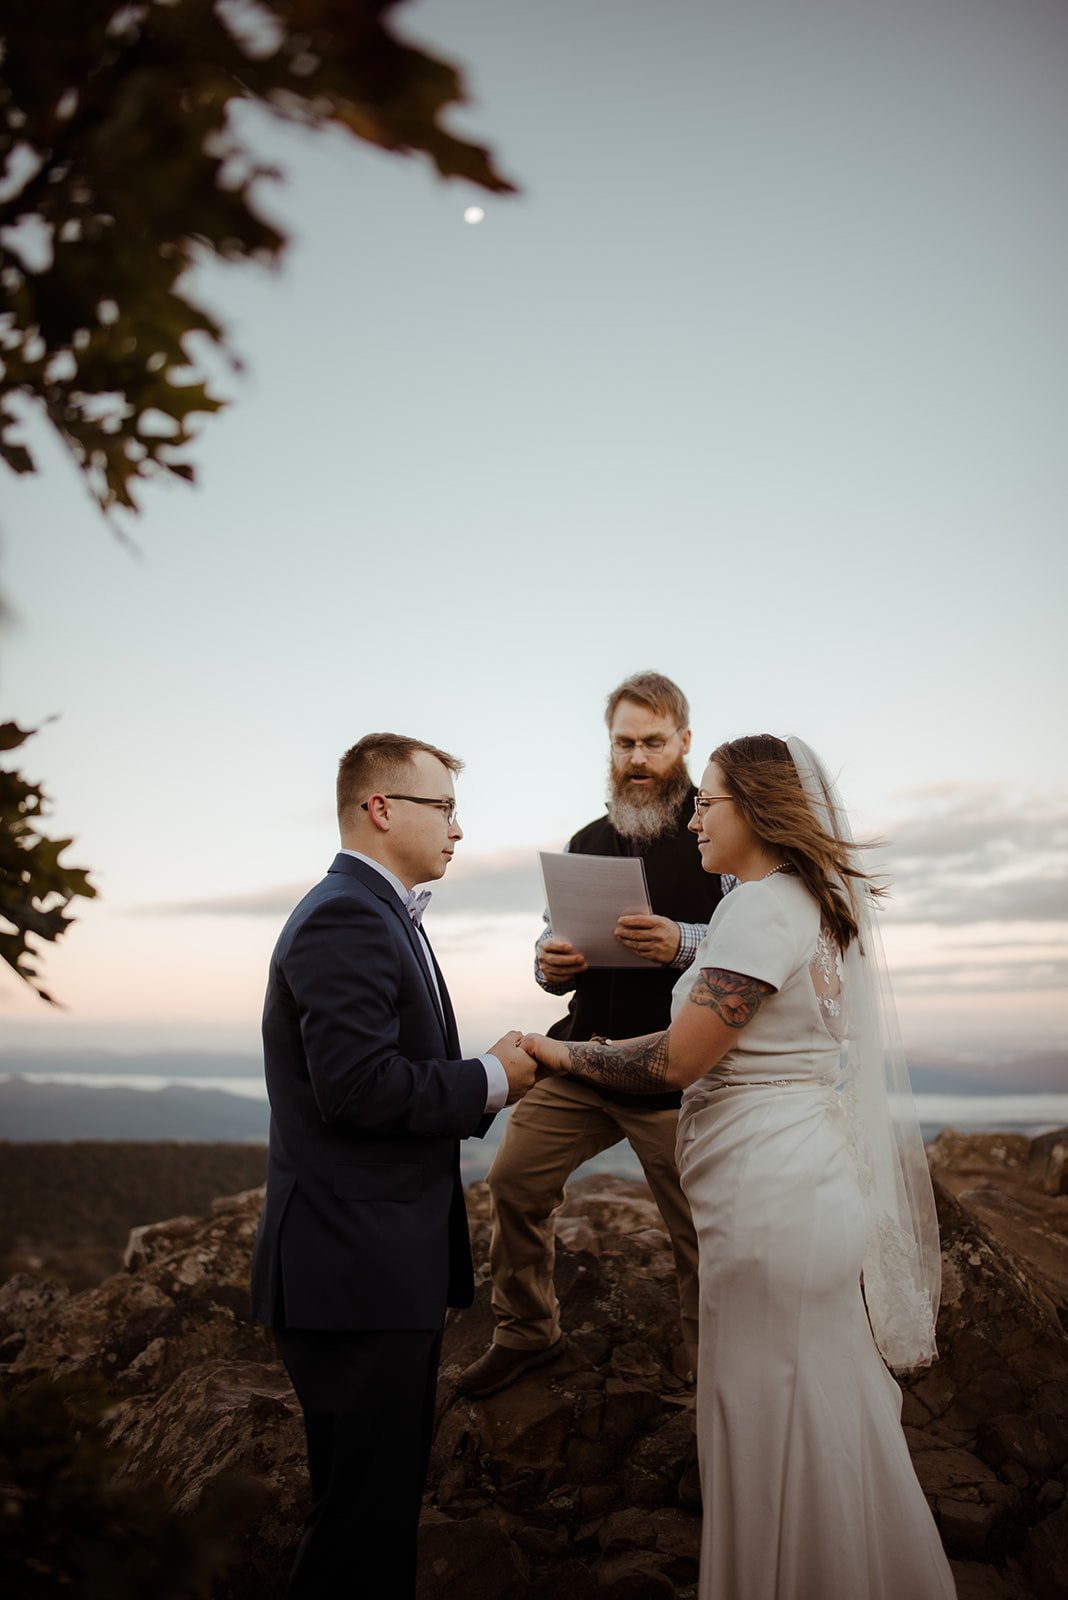 Shenandoah National Park Hiking Elopement with Guests - White Sails Creative_35.jpg